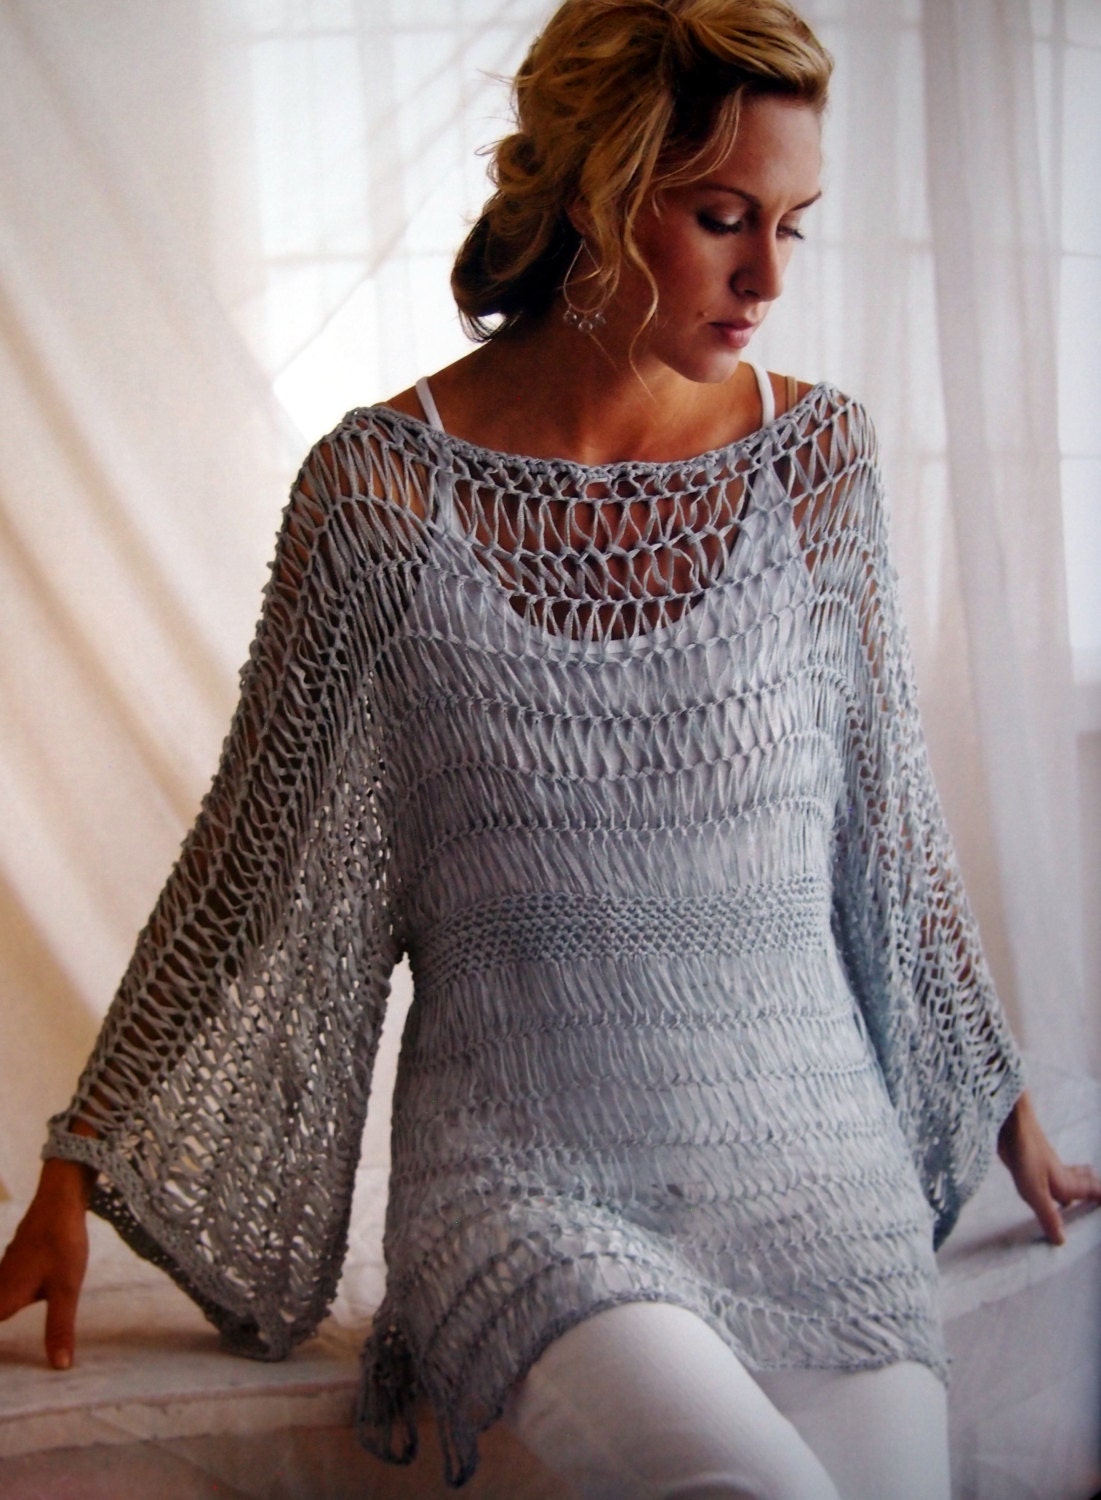 Crochet So Fine Exquisite Designs With Fine Yarns By Kristin